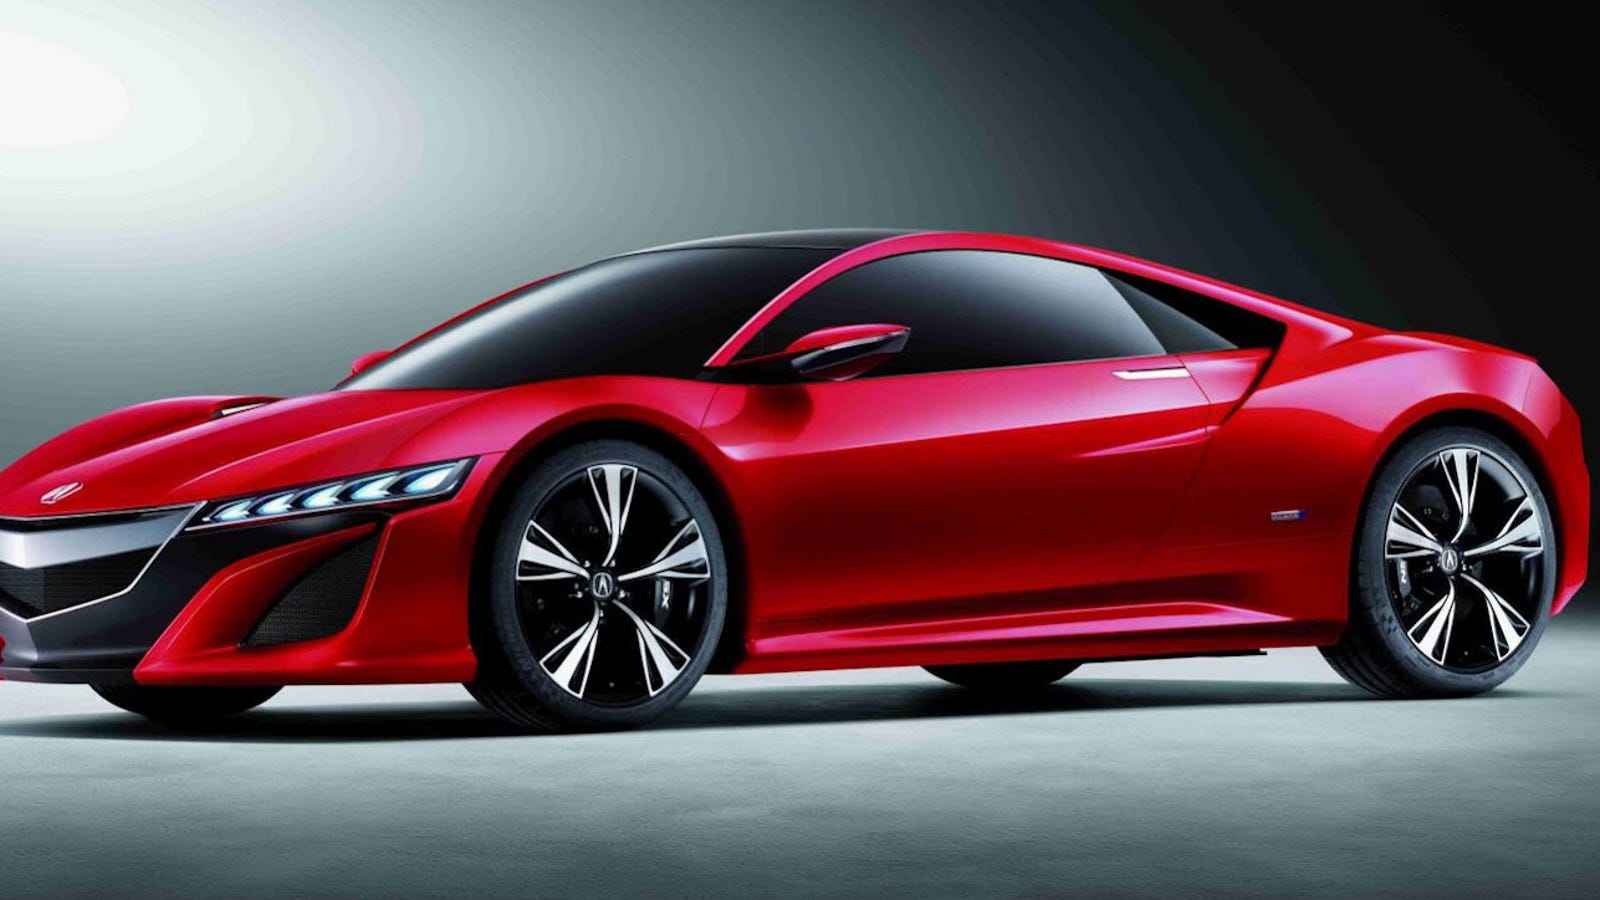 Where can you find the price of a 2015 Acura NSX?